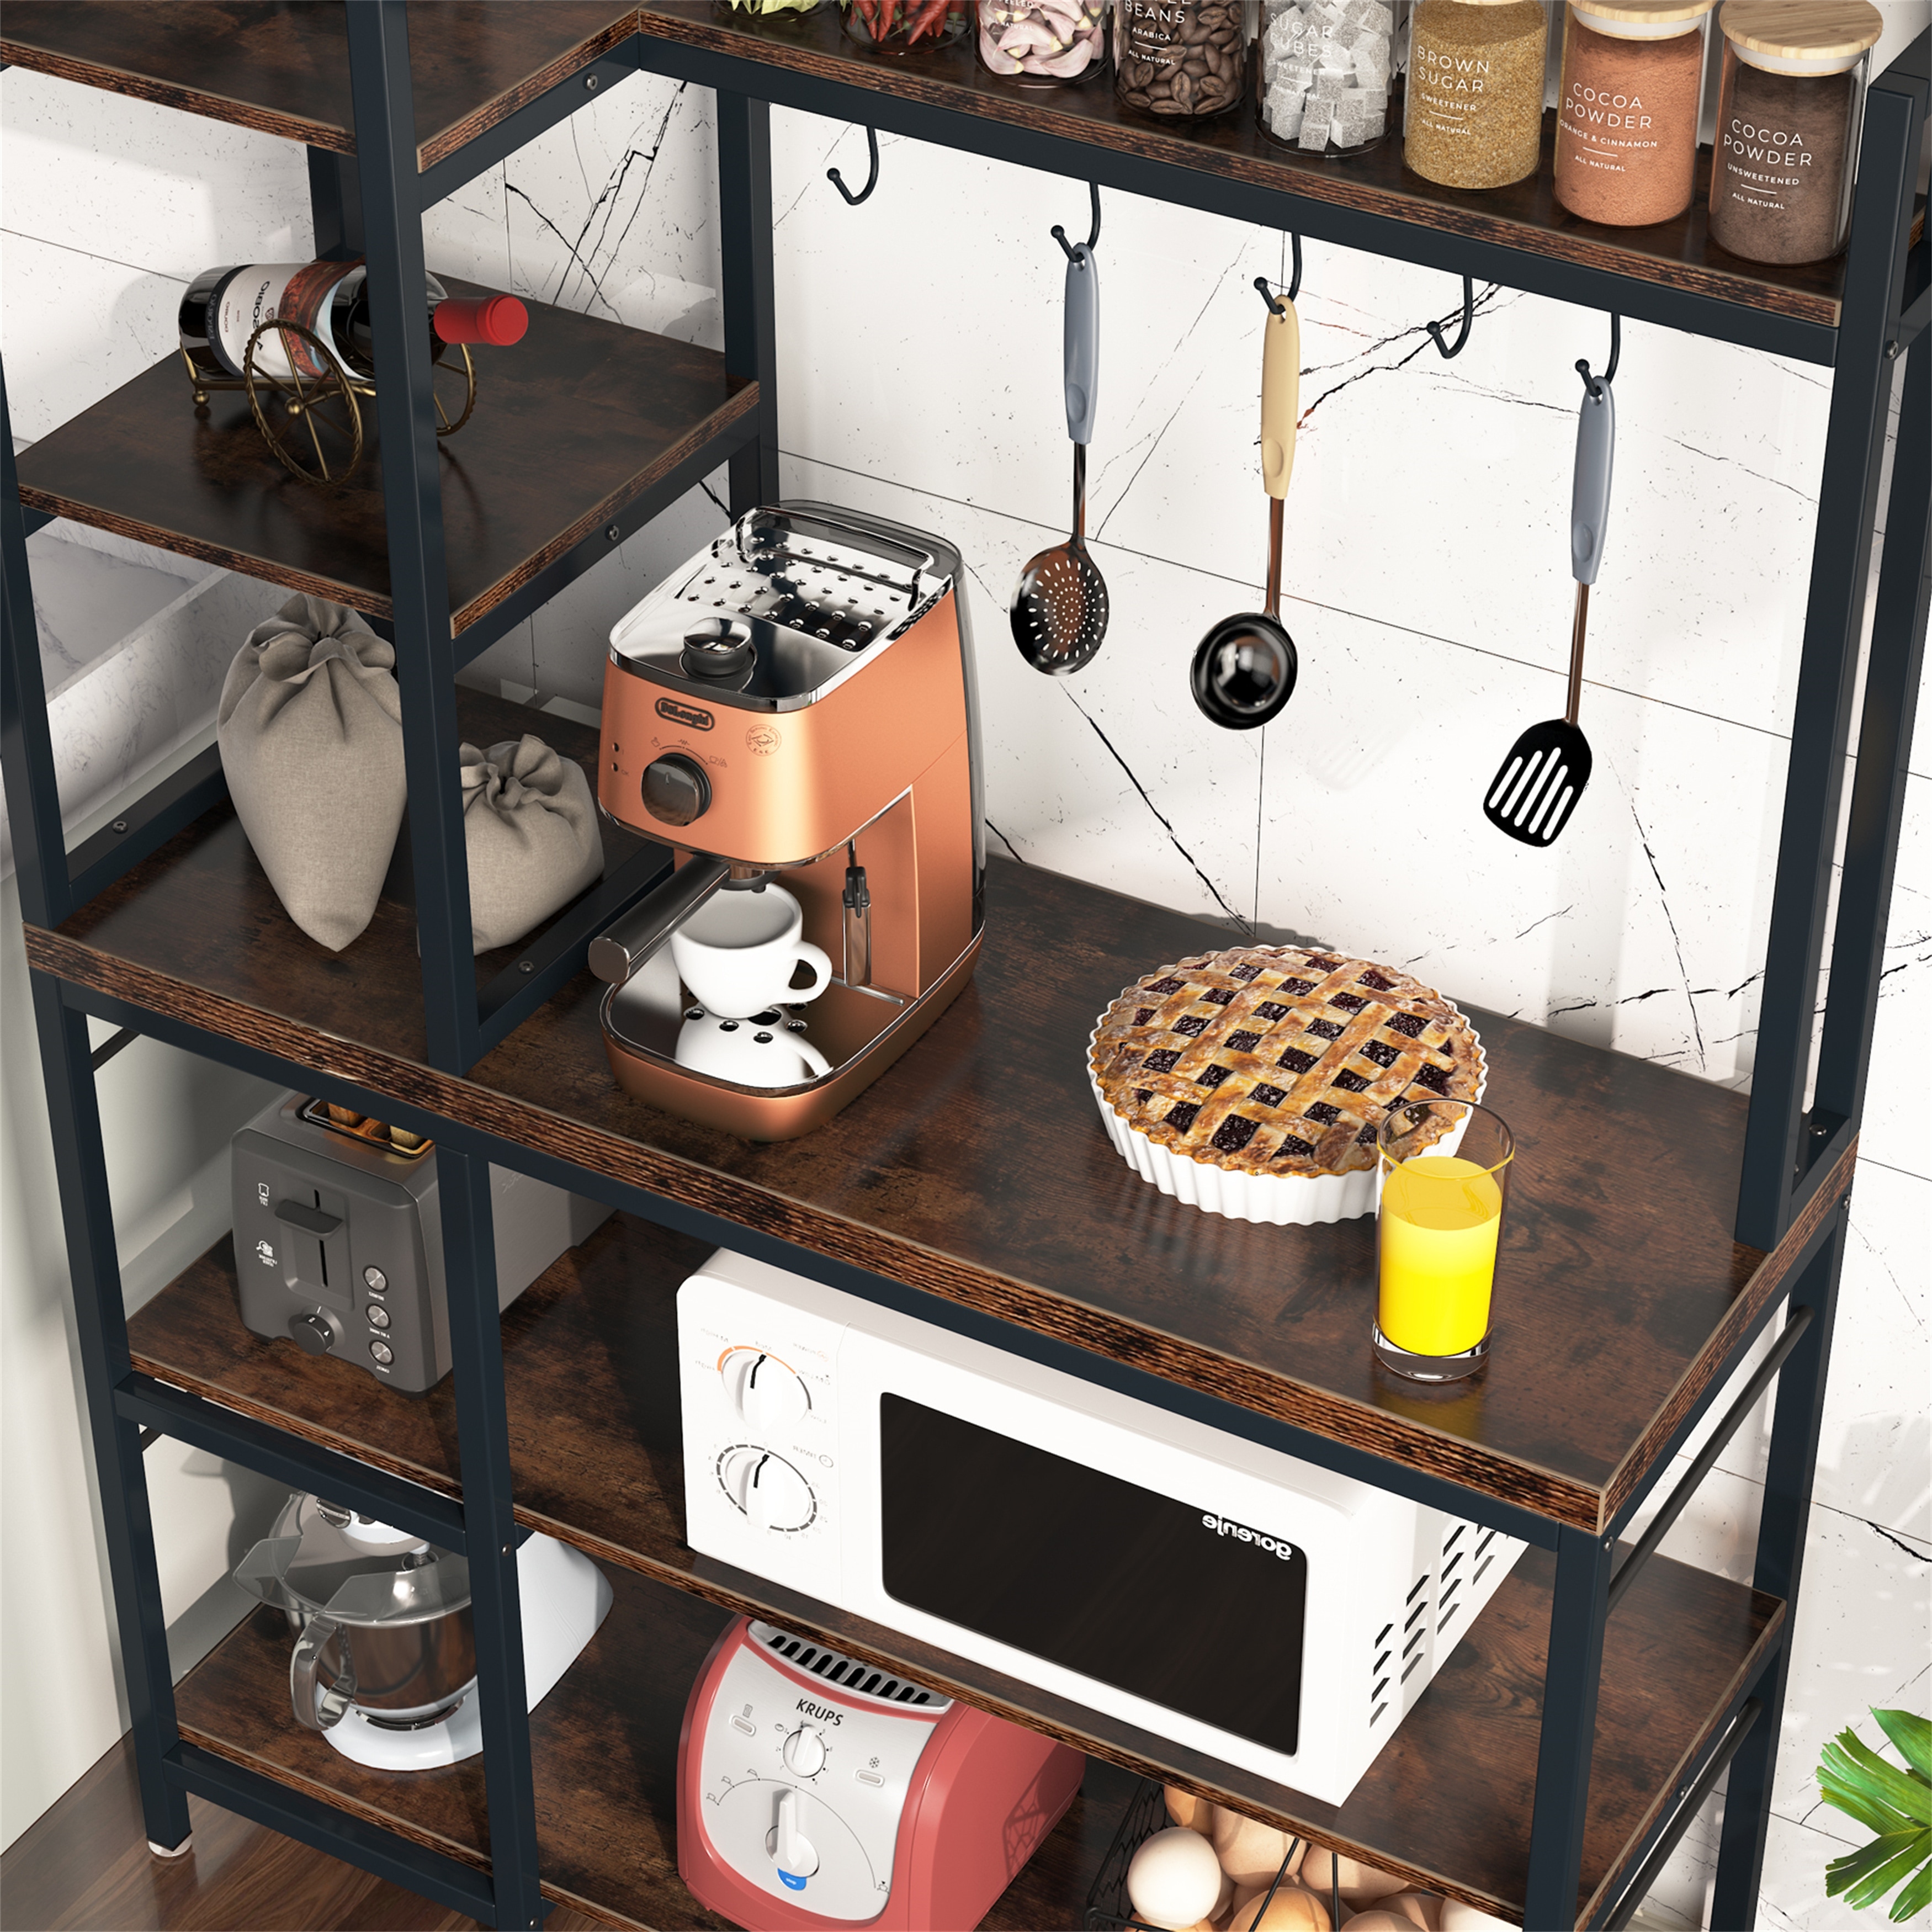 https://ak1.ostkcdn.com/images/products/is/images/direct/75d105331b7ea4046231856bd75d54a0103d428b/Bakers-Rack%2C-Kitchen-Organization%2C-Microwave-Oven-Stand%2C-5-Tier-Kitchen-Utility-Storage-Shelf.jpg